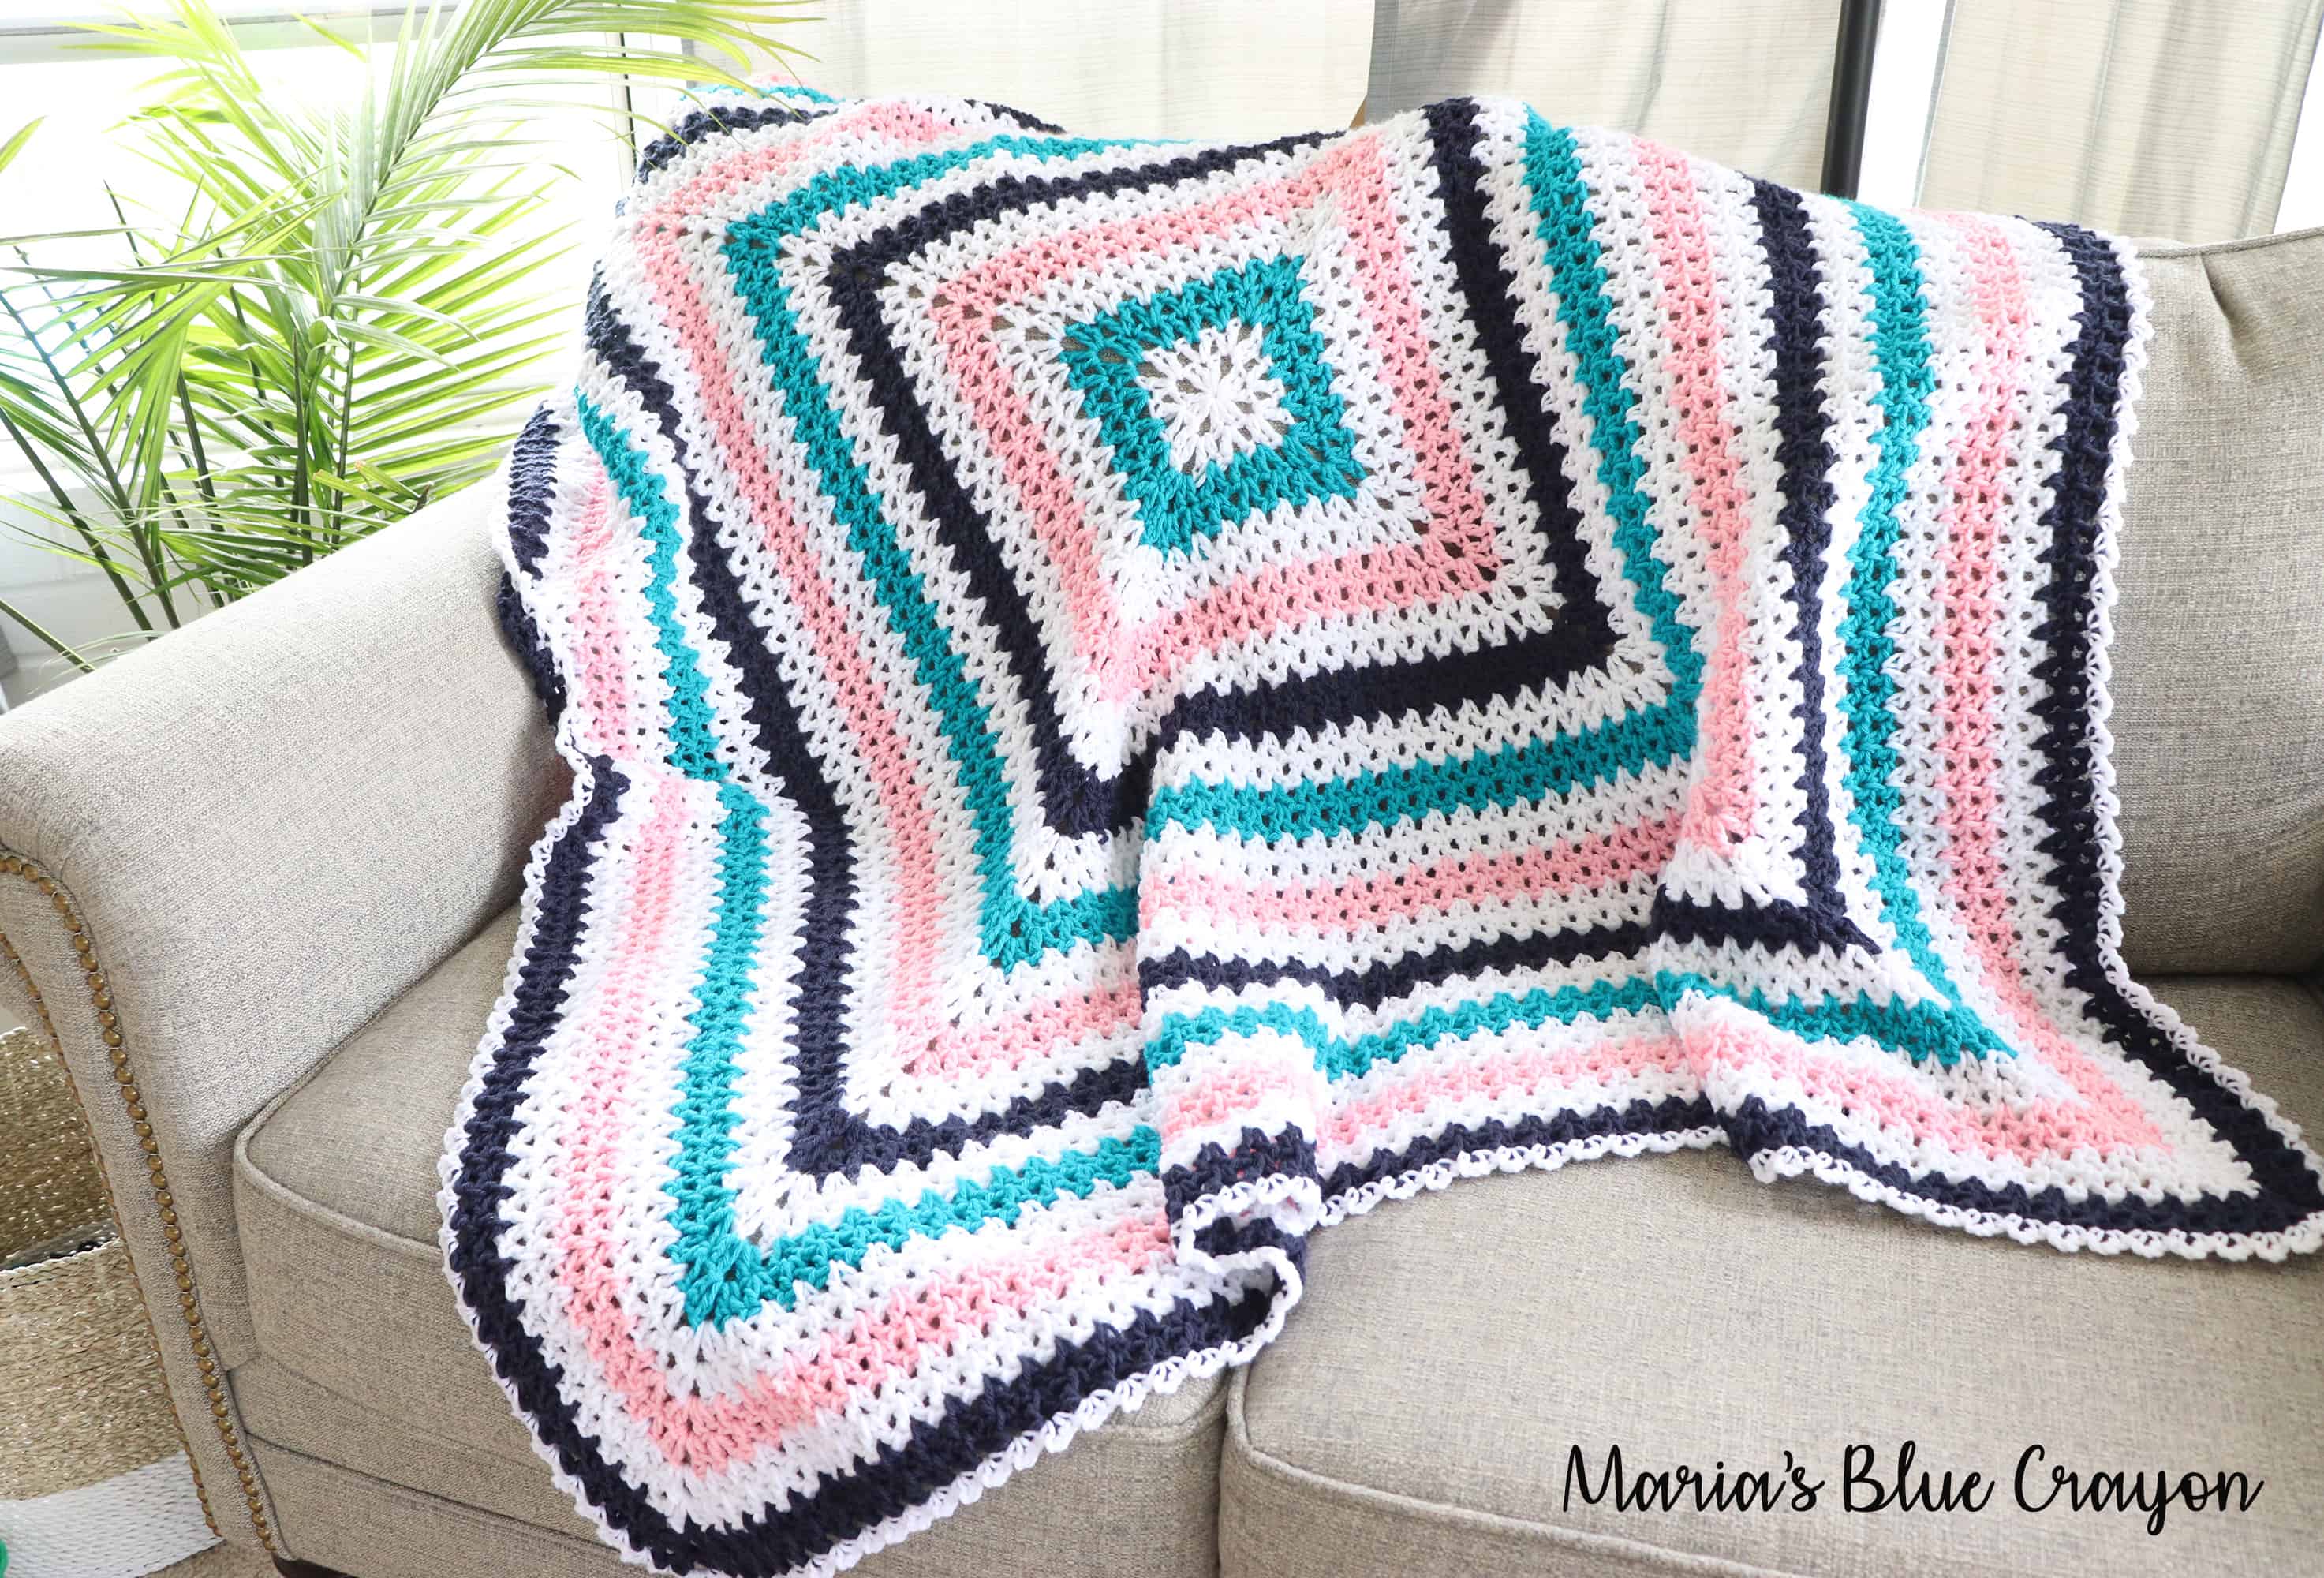 V Stitch Granny Crochet Blanket Pattern Maria S Blue Crayon,Gin And Tonic Recipe Variations